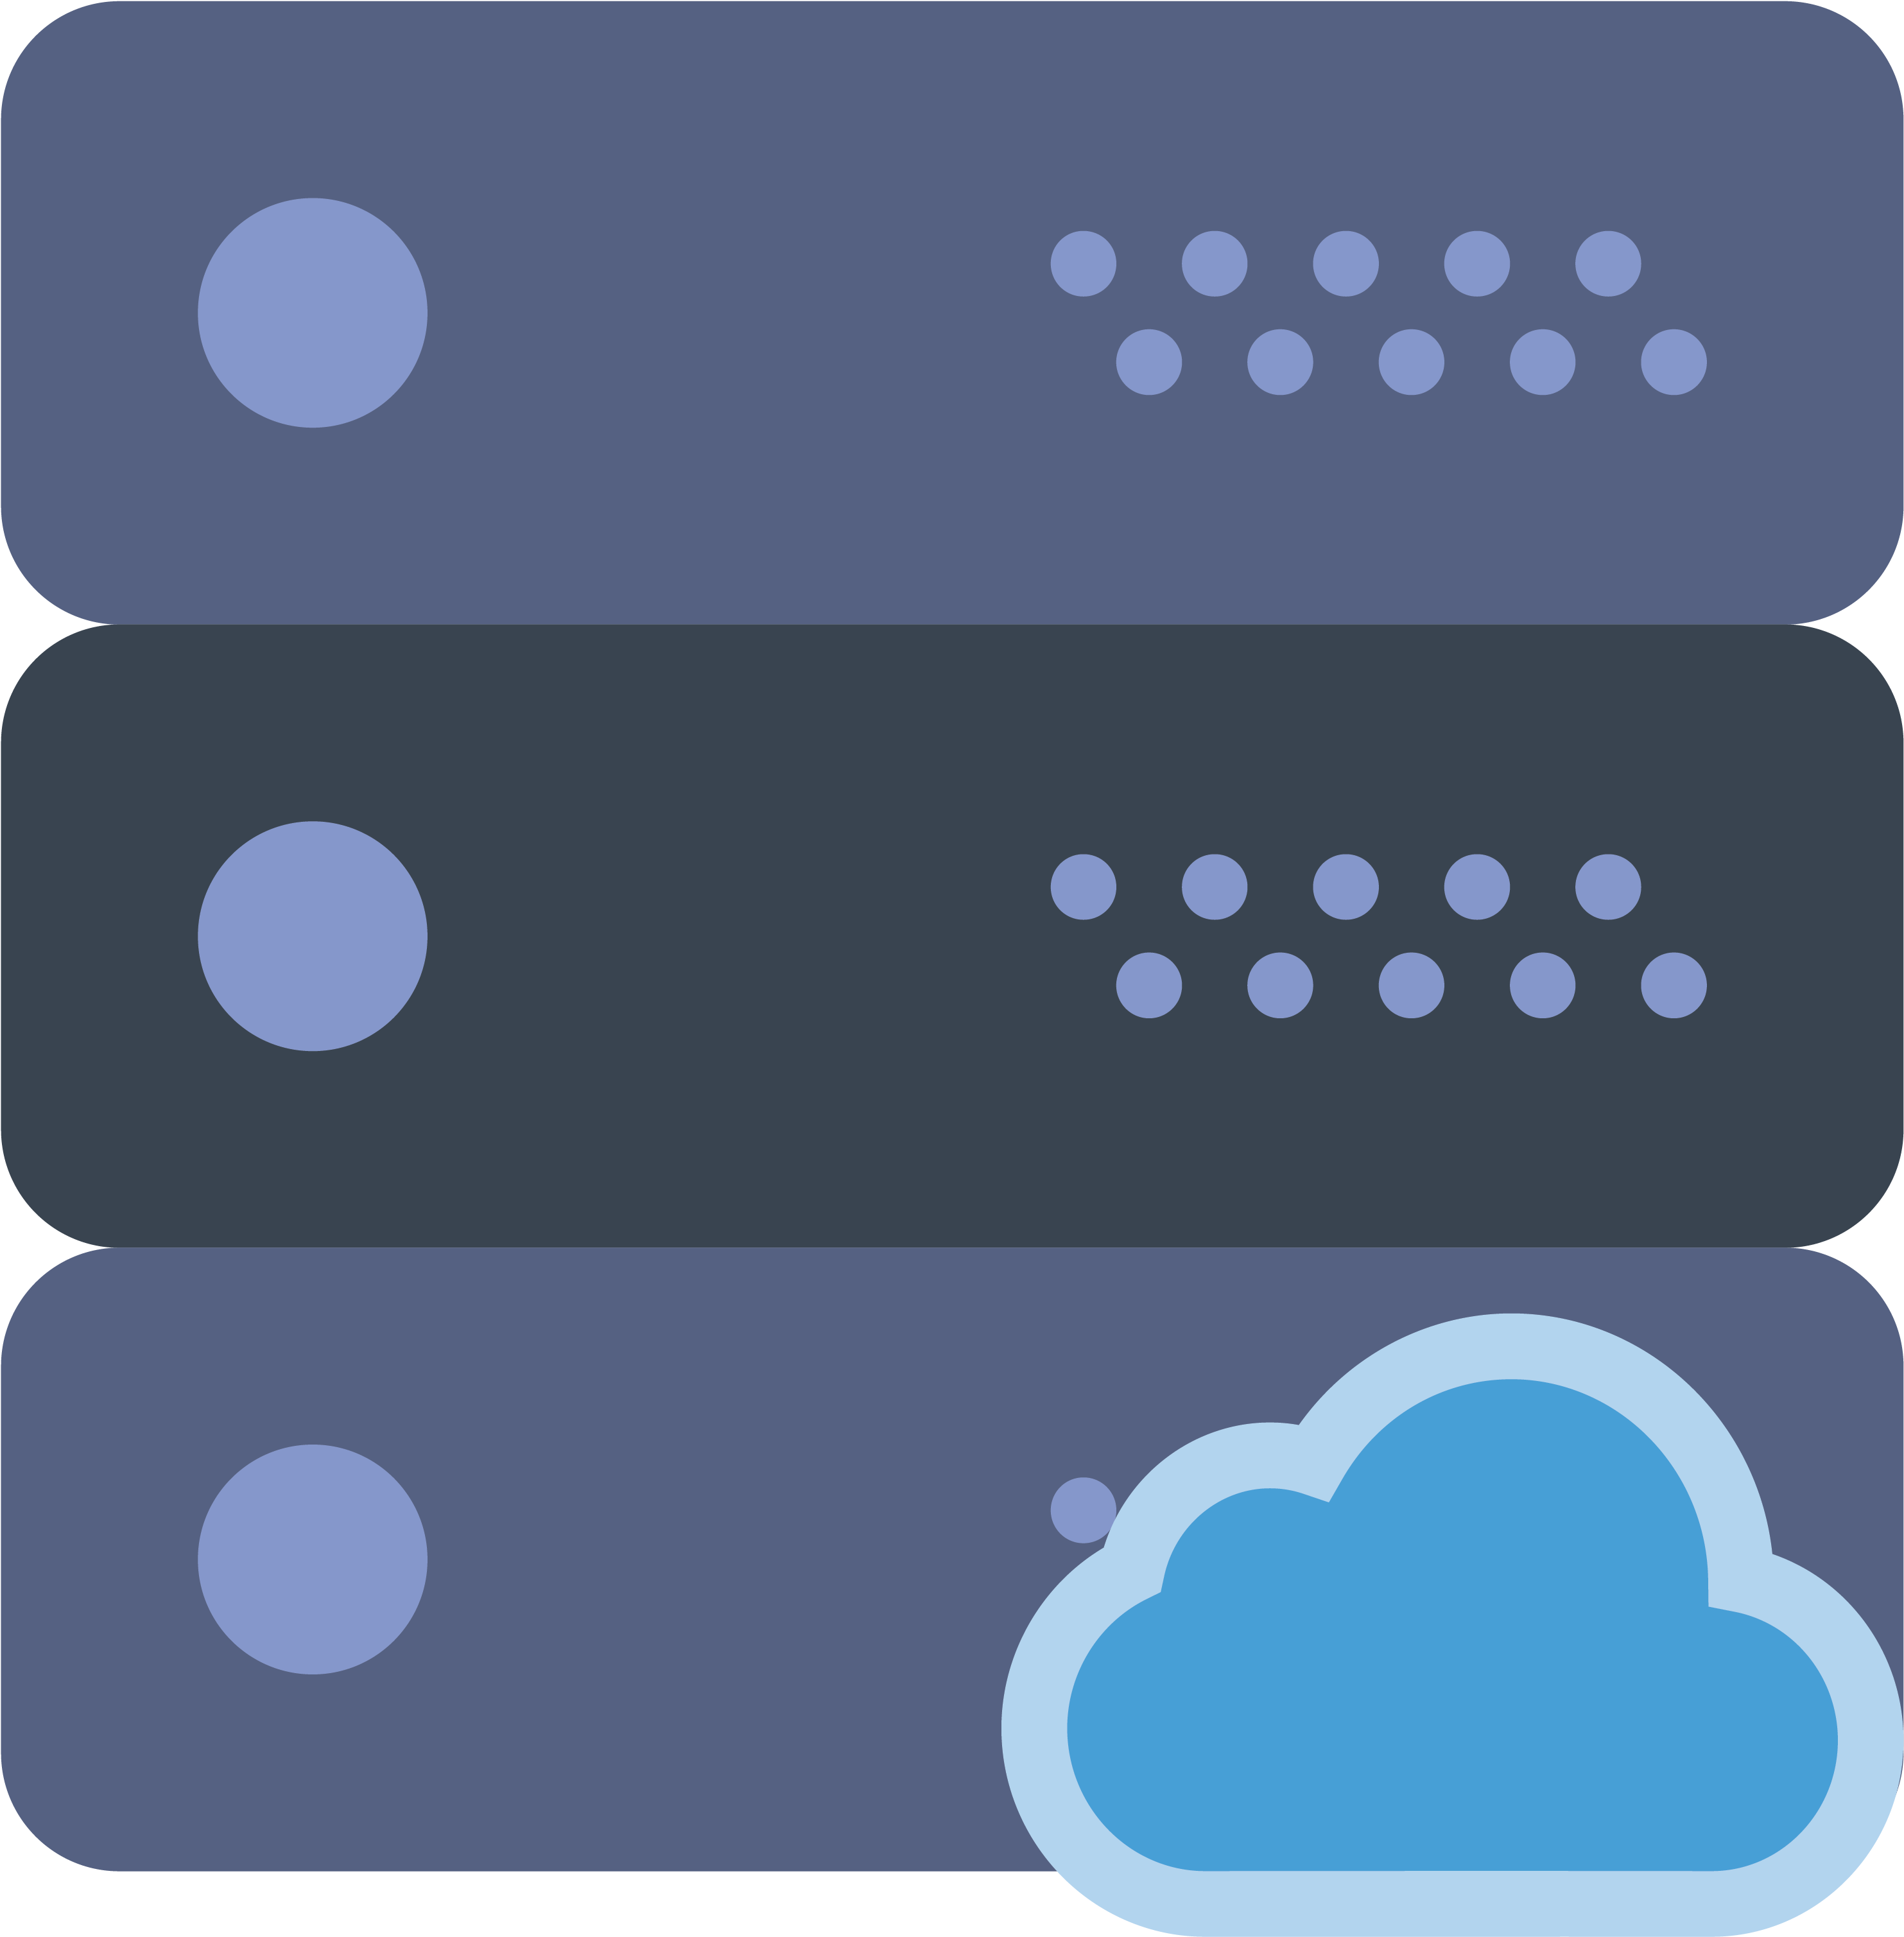 Net waiting. What is cloud Technology icon. Fixed Assets icon 32x32 Flat.